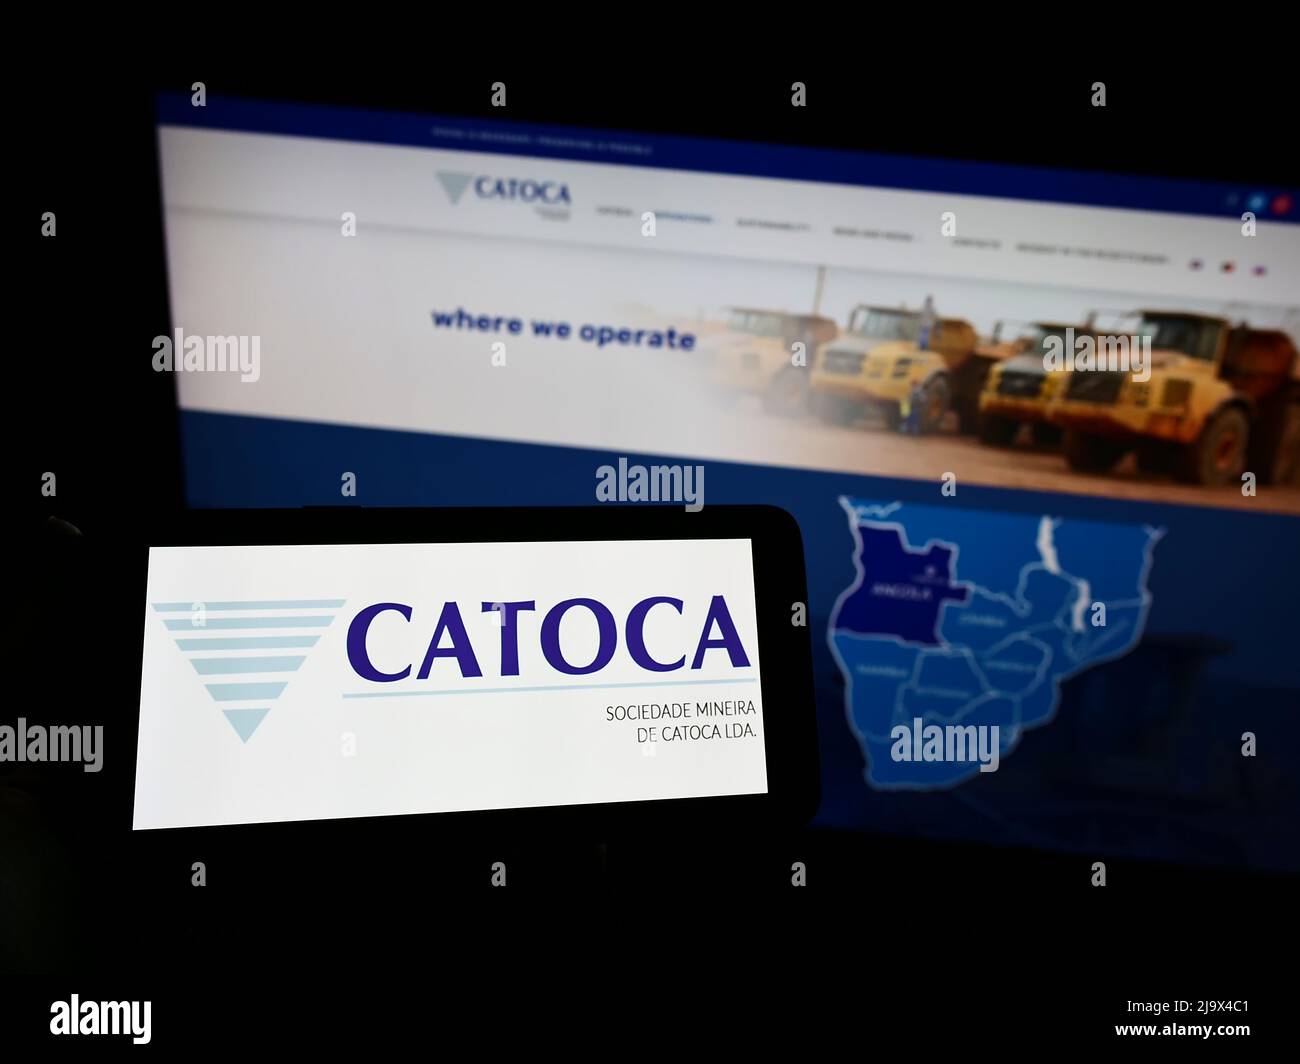 Person holding smartphone with logo of mining company Sociedade Mineira de Catoca Lda. on screen in front of website. Focus on phone display. Stock Photo